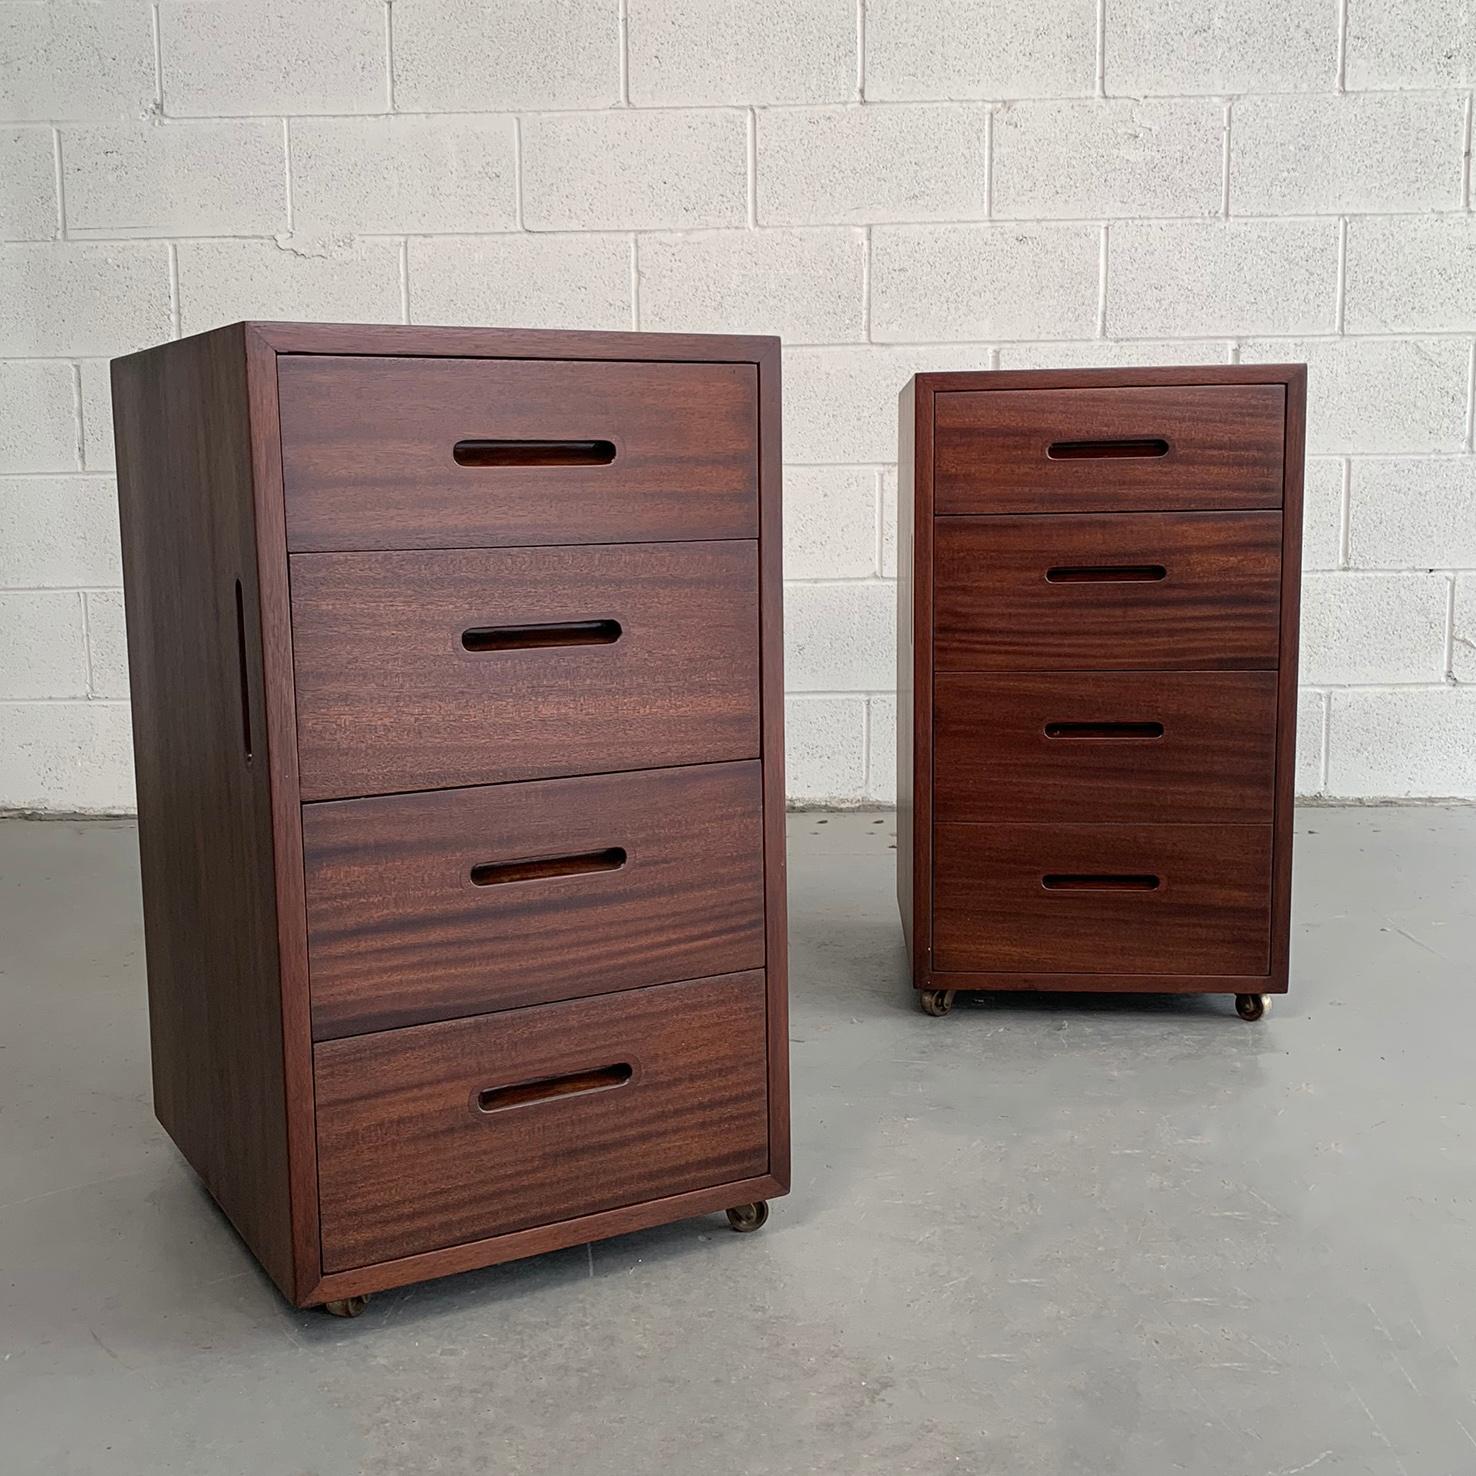 20th Century Mid-Century Modern Mahogany Office Filing Cabinets Attributed to Edward Wormley